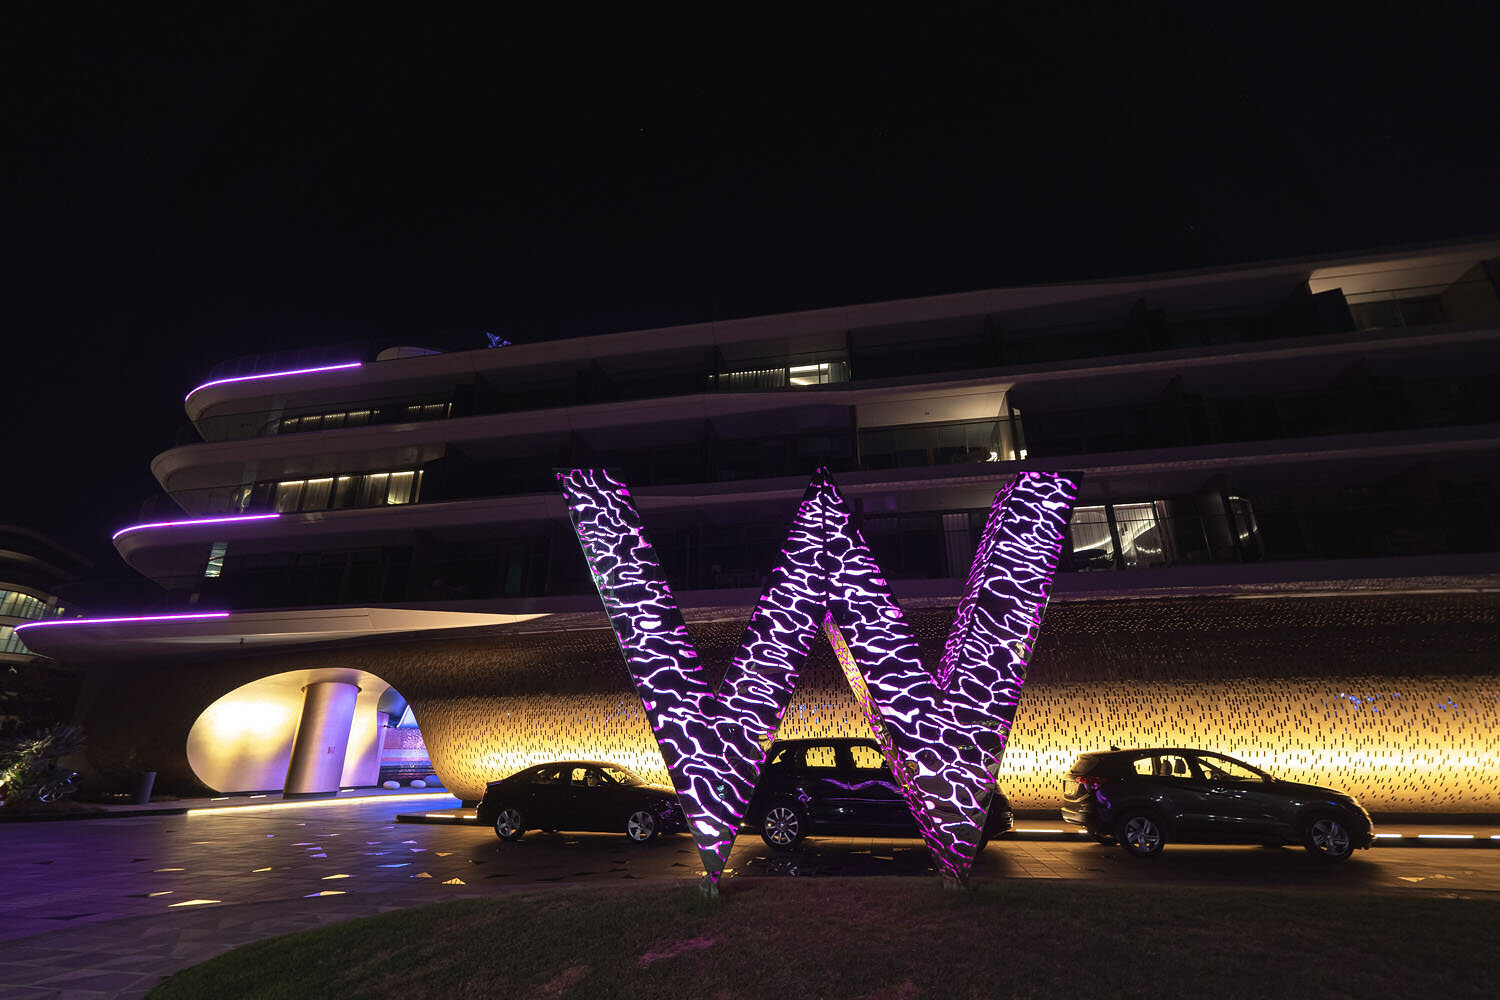  W logo outside the building at night 